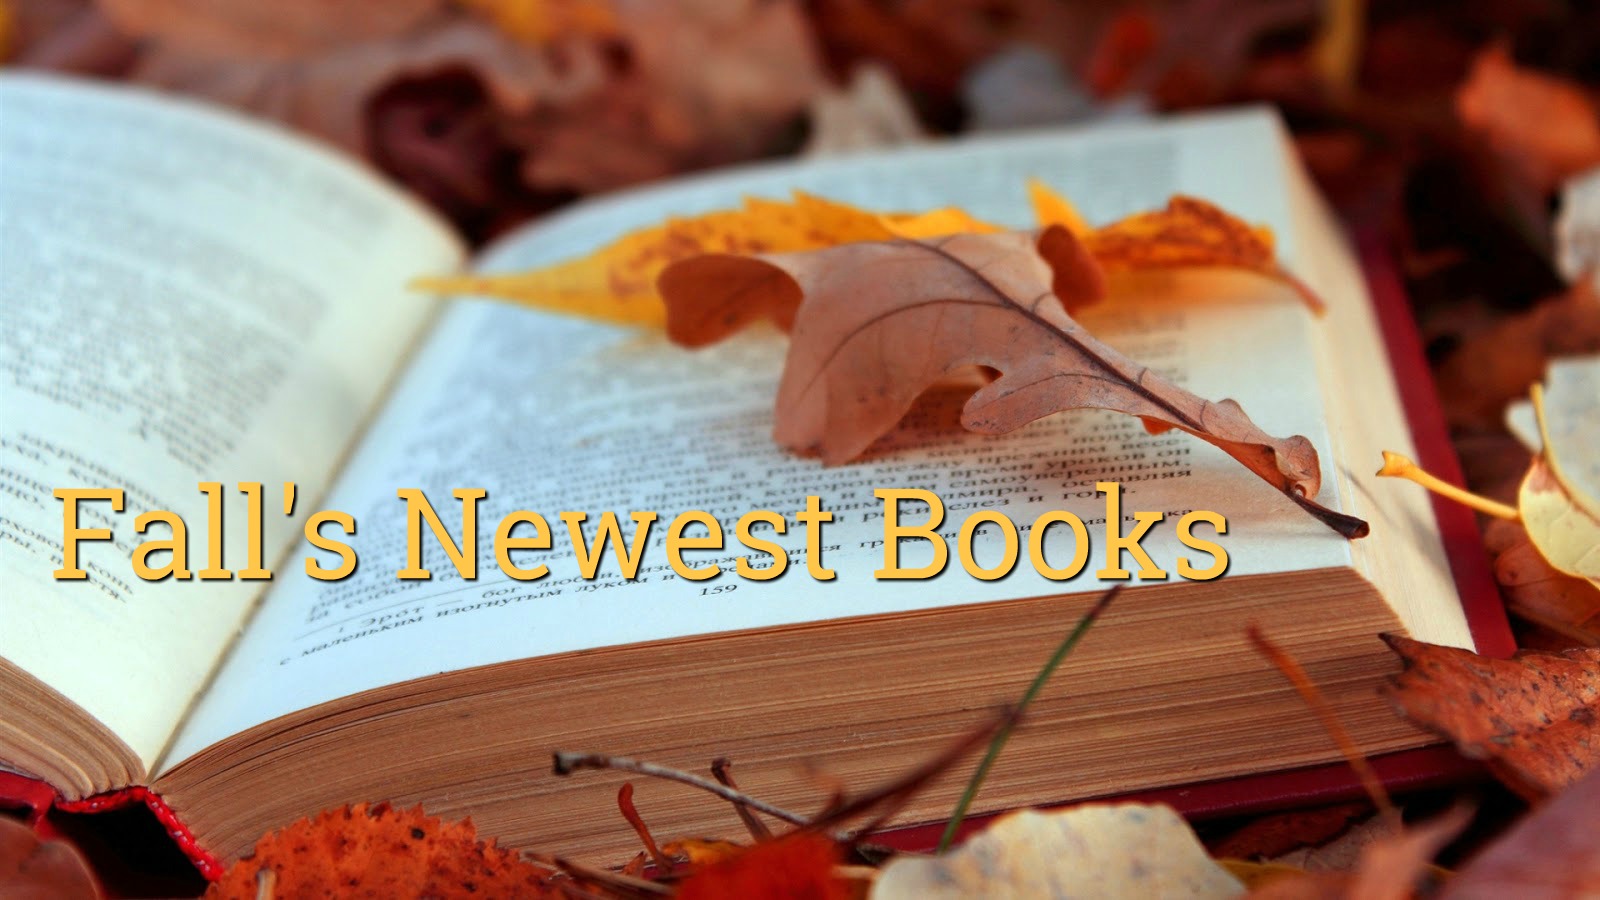 My Newest Book Recommendations for Fall- Fiction, Suspense, Cookbooks, and Inspirational Titles